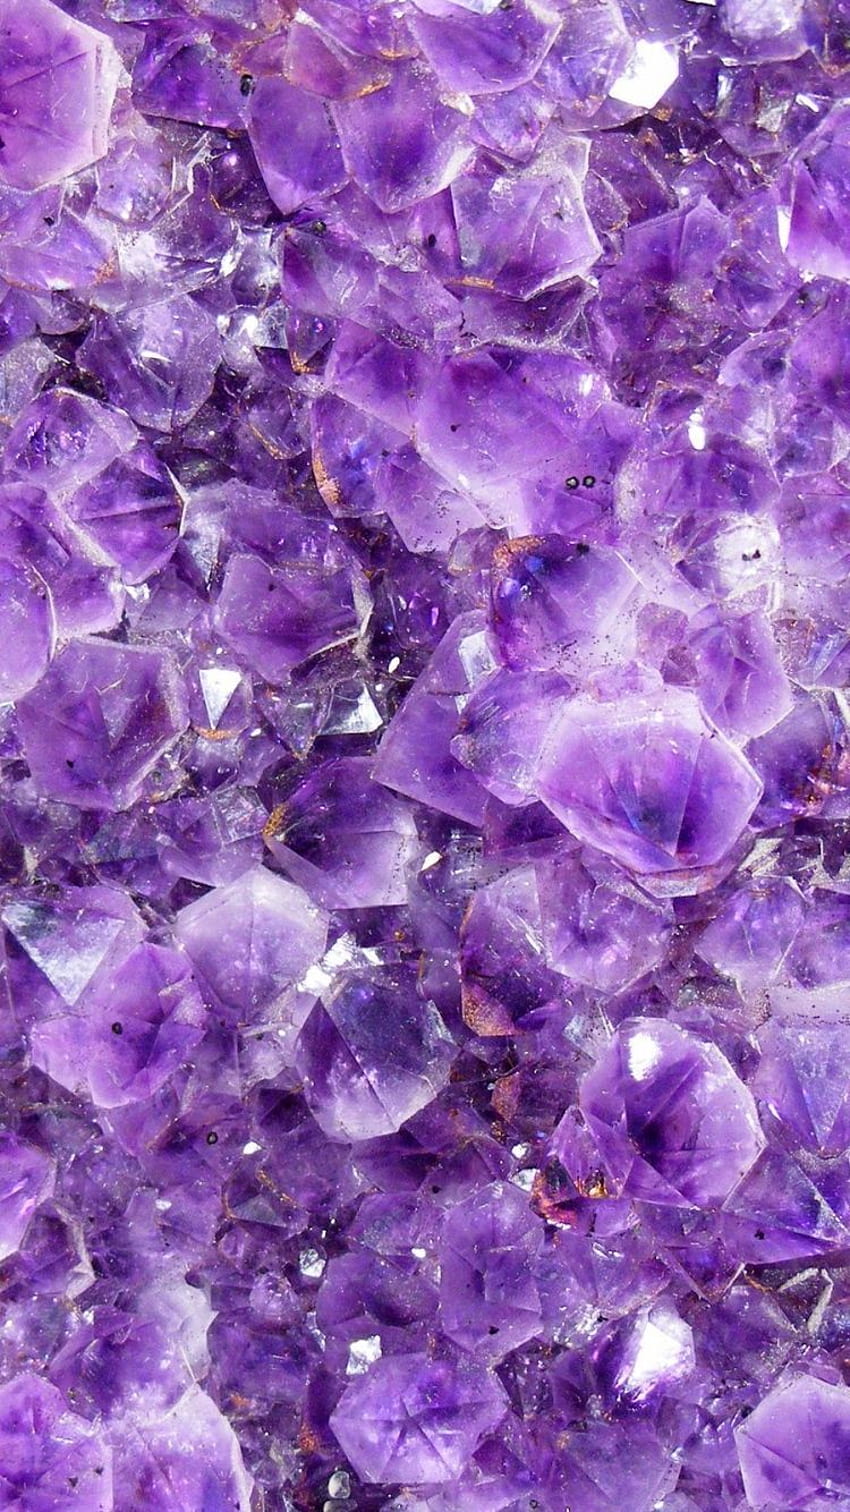 Amethyst Photos, Download The BEST Free Amethyst Stock Photos & HD Images